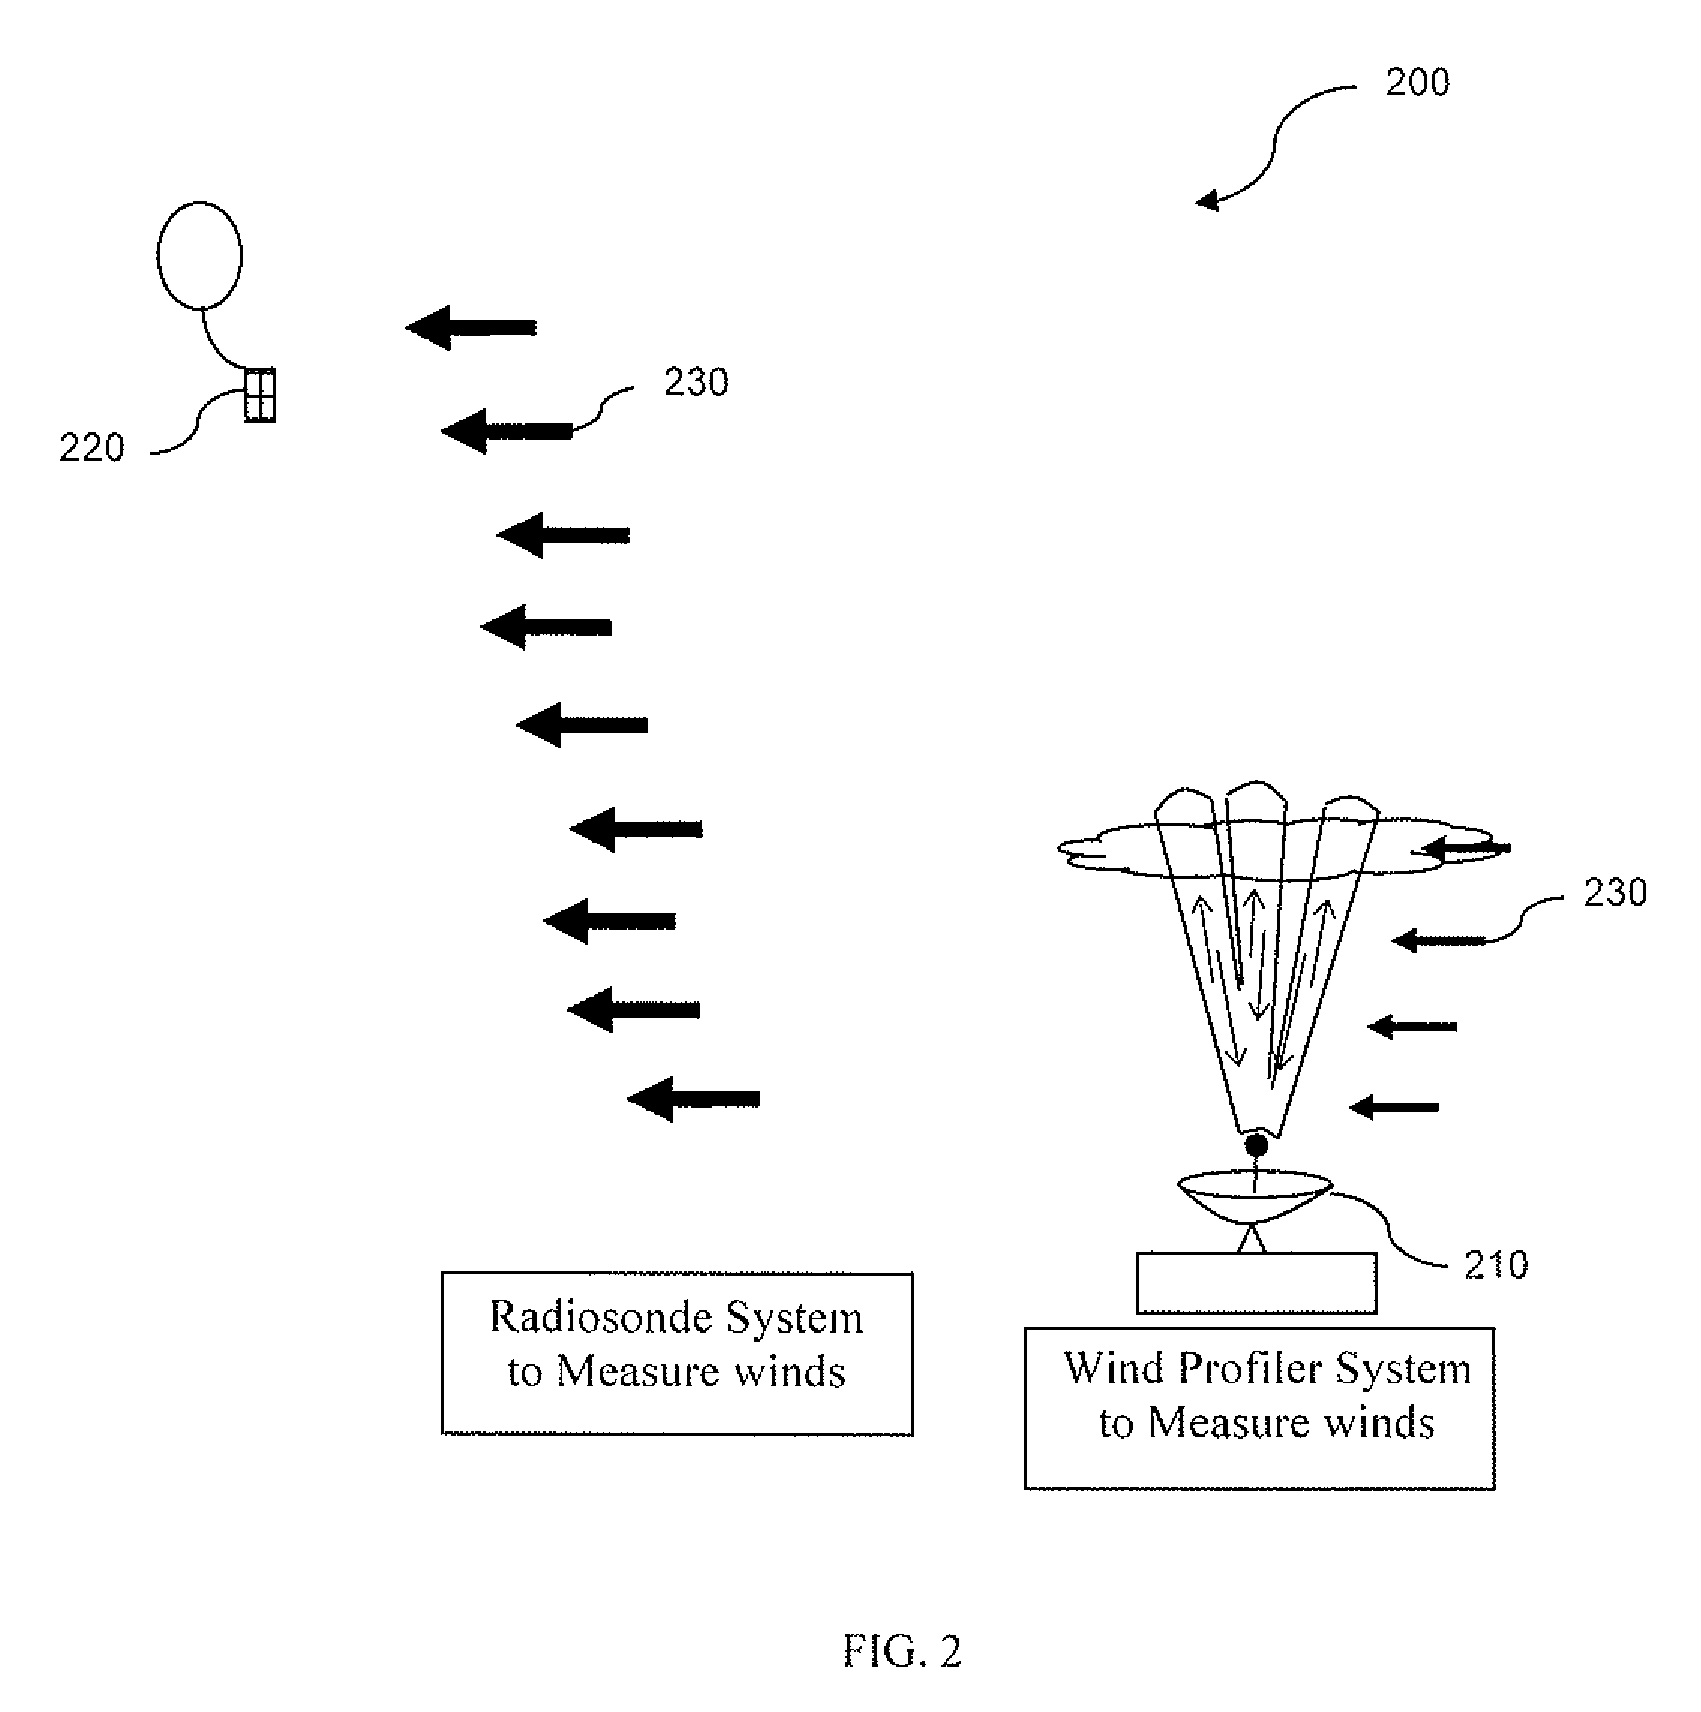 Process for generating spatially continuous wind profiles from wind profiler measurements